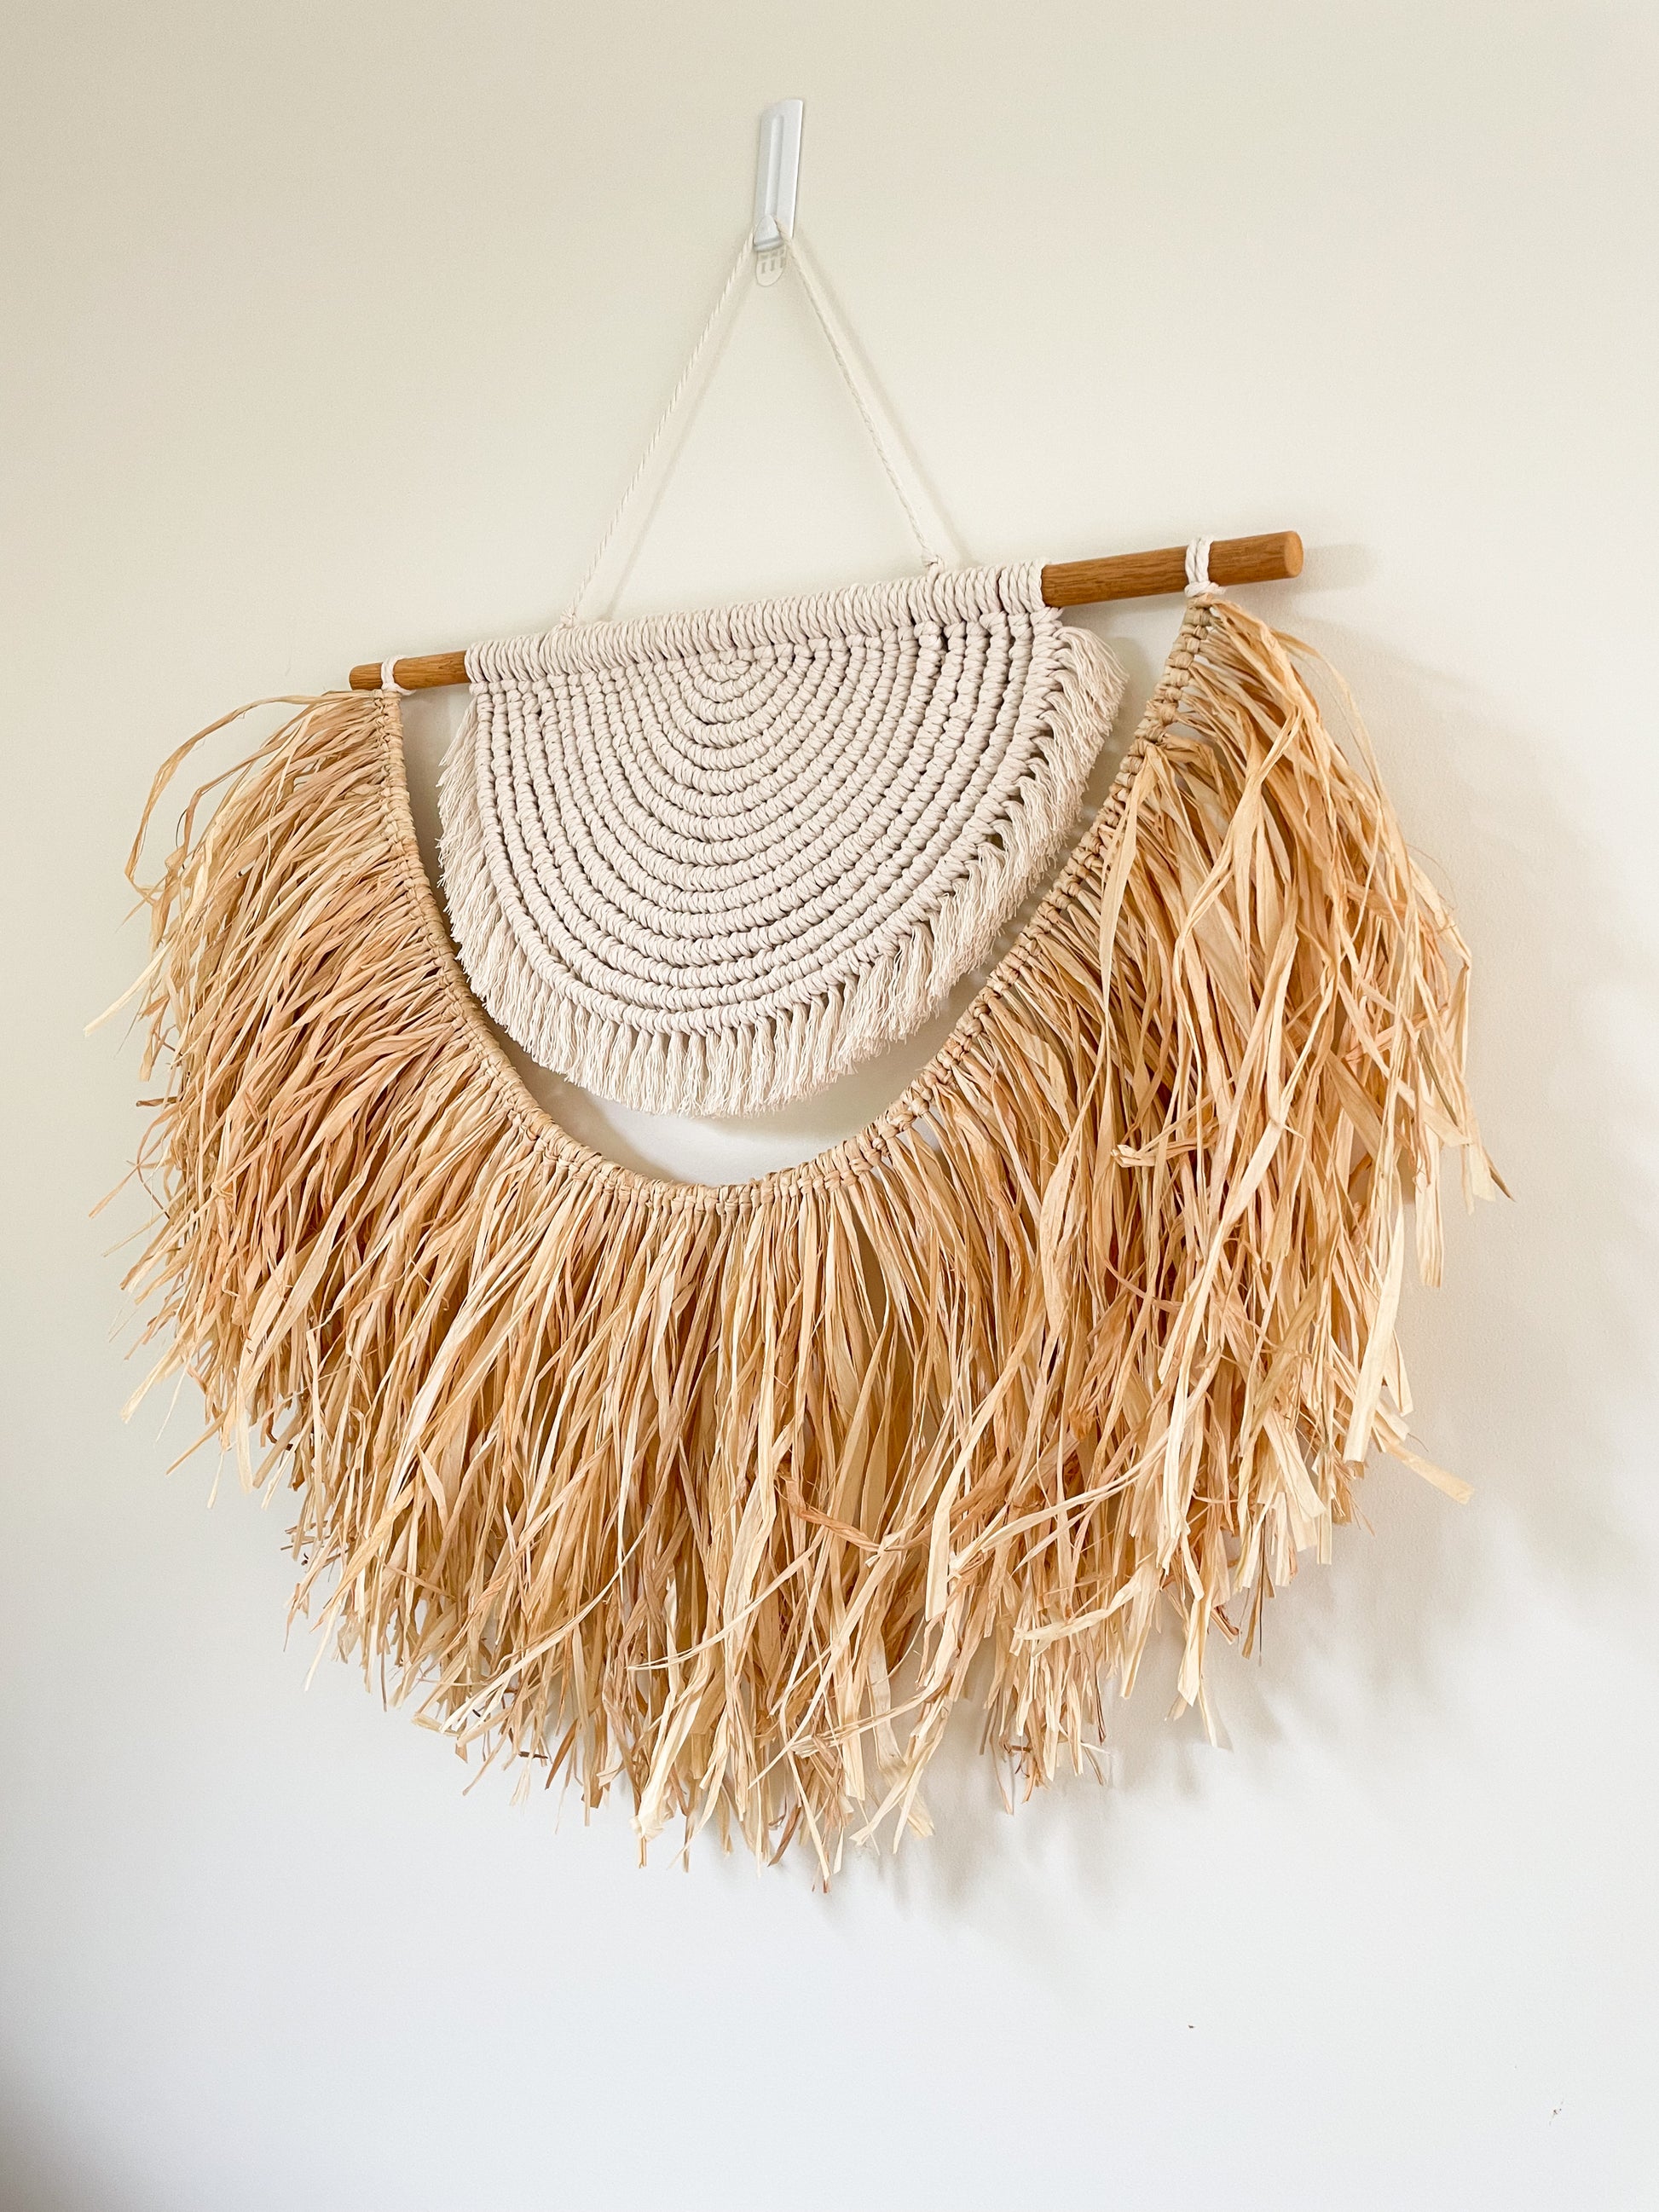 Large macrame and raffia wall hanging hanged on a wall 